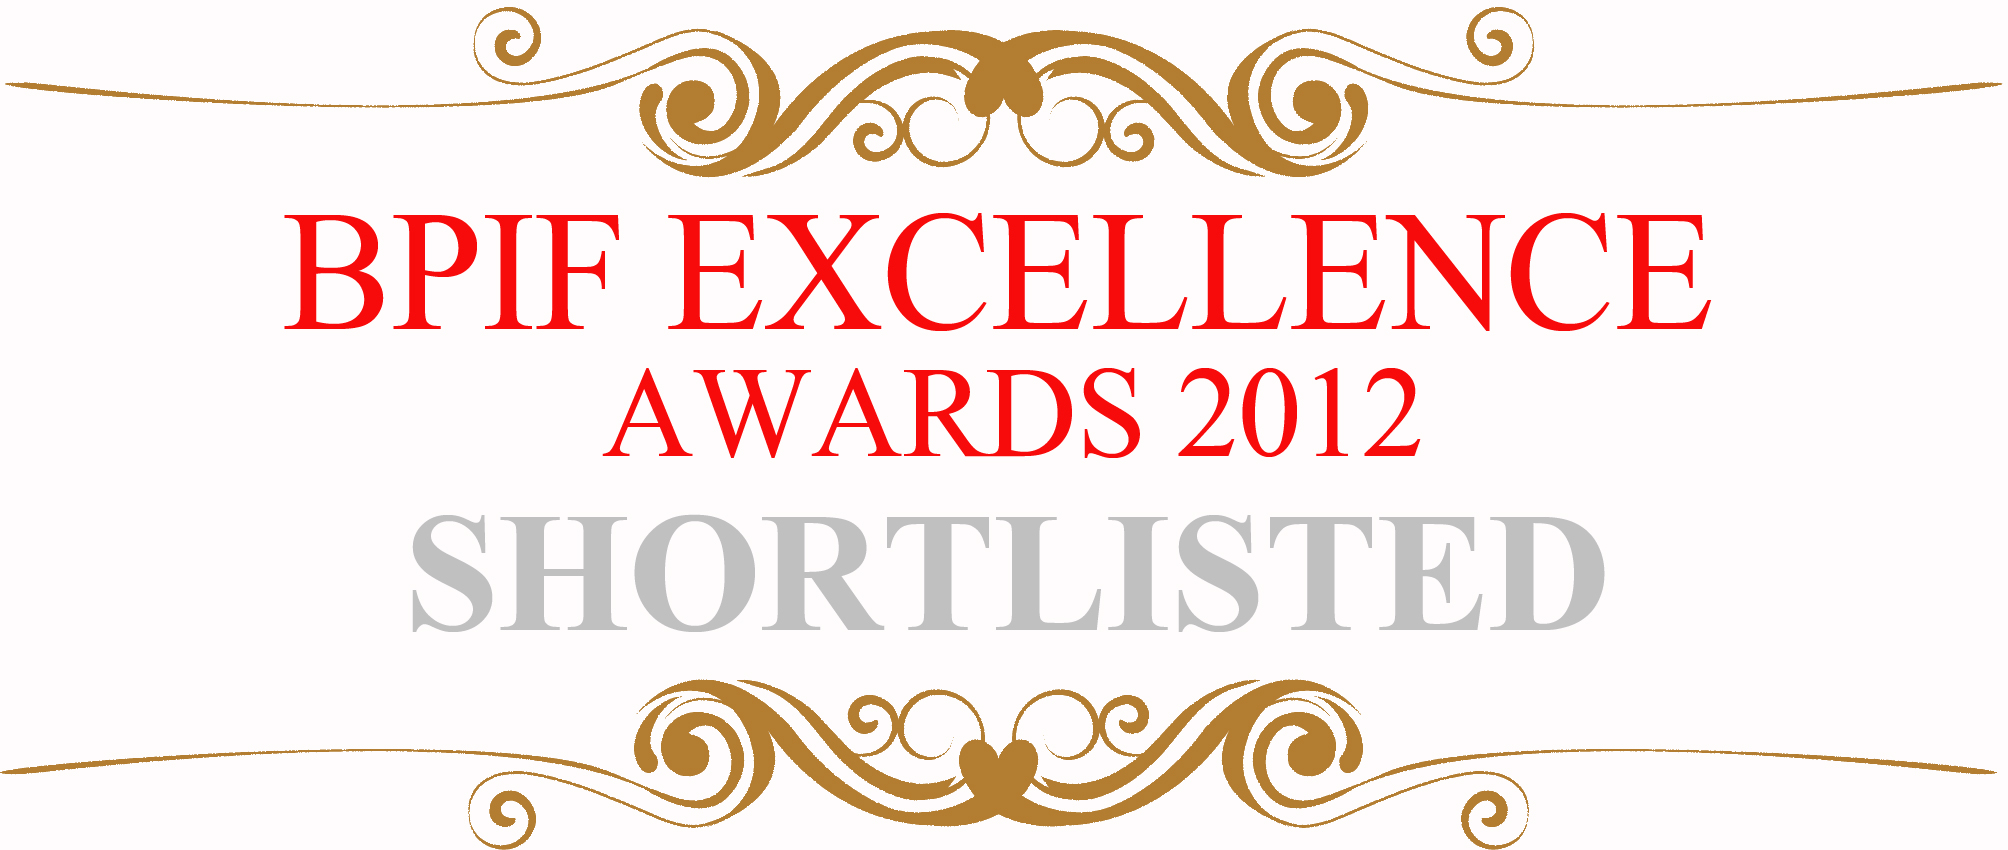 Outstanding shortlist for Excellence Awards